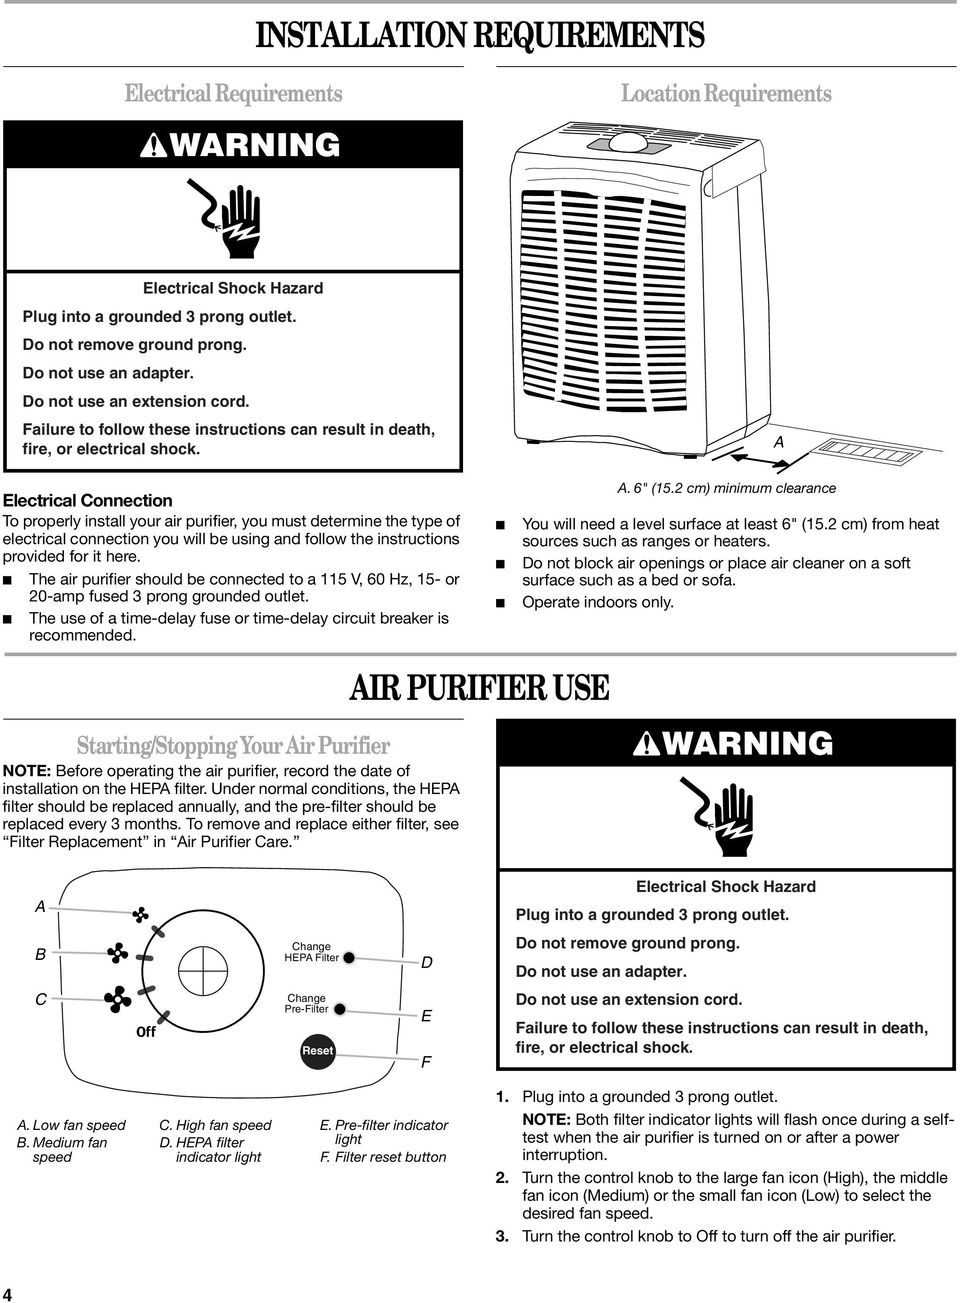 Electrical Connection To properly install your air purifier, you must determine the type of electrical connection you will be using and follow the instructions provided for it here.